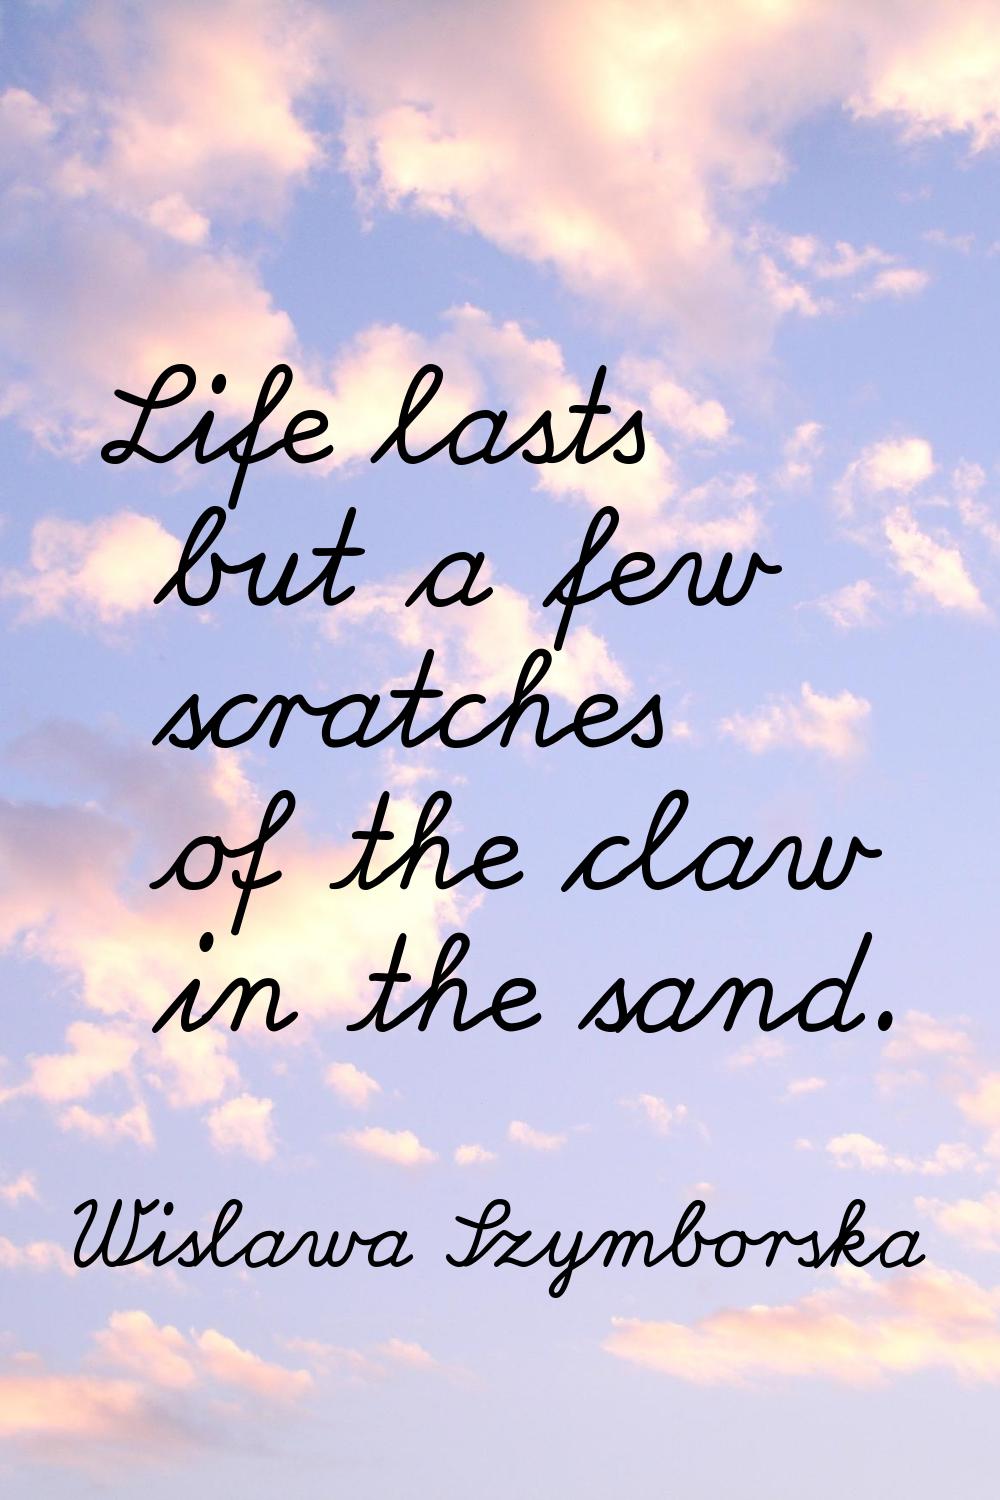 Life lasts but a few scratches of the claw in the sand.